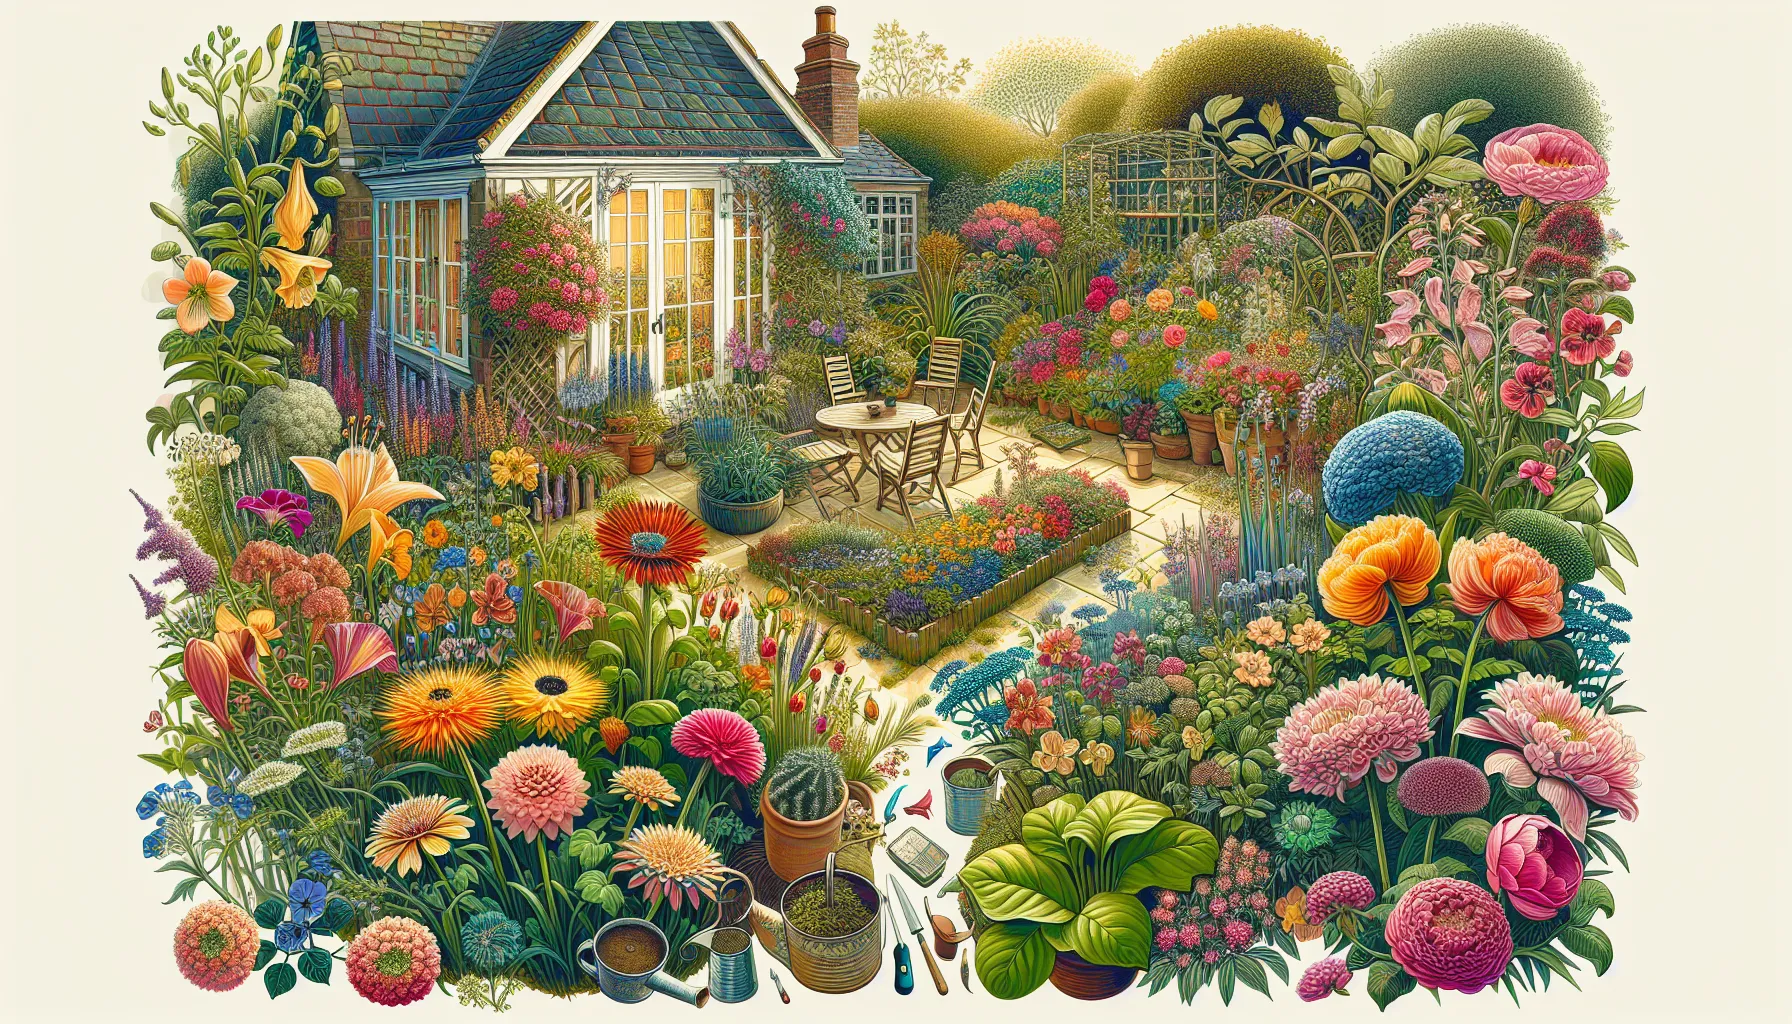 A vibrant and colorful illustration of a lush garden path surrounded by a variety of yard flowers, with a dazzling sun peeking through the foliage.